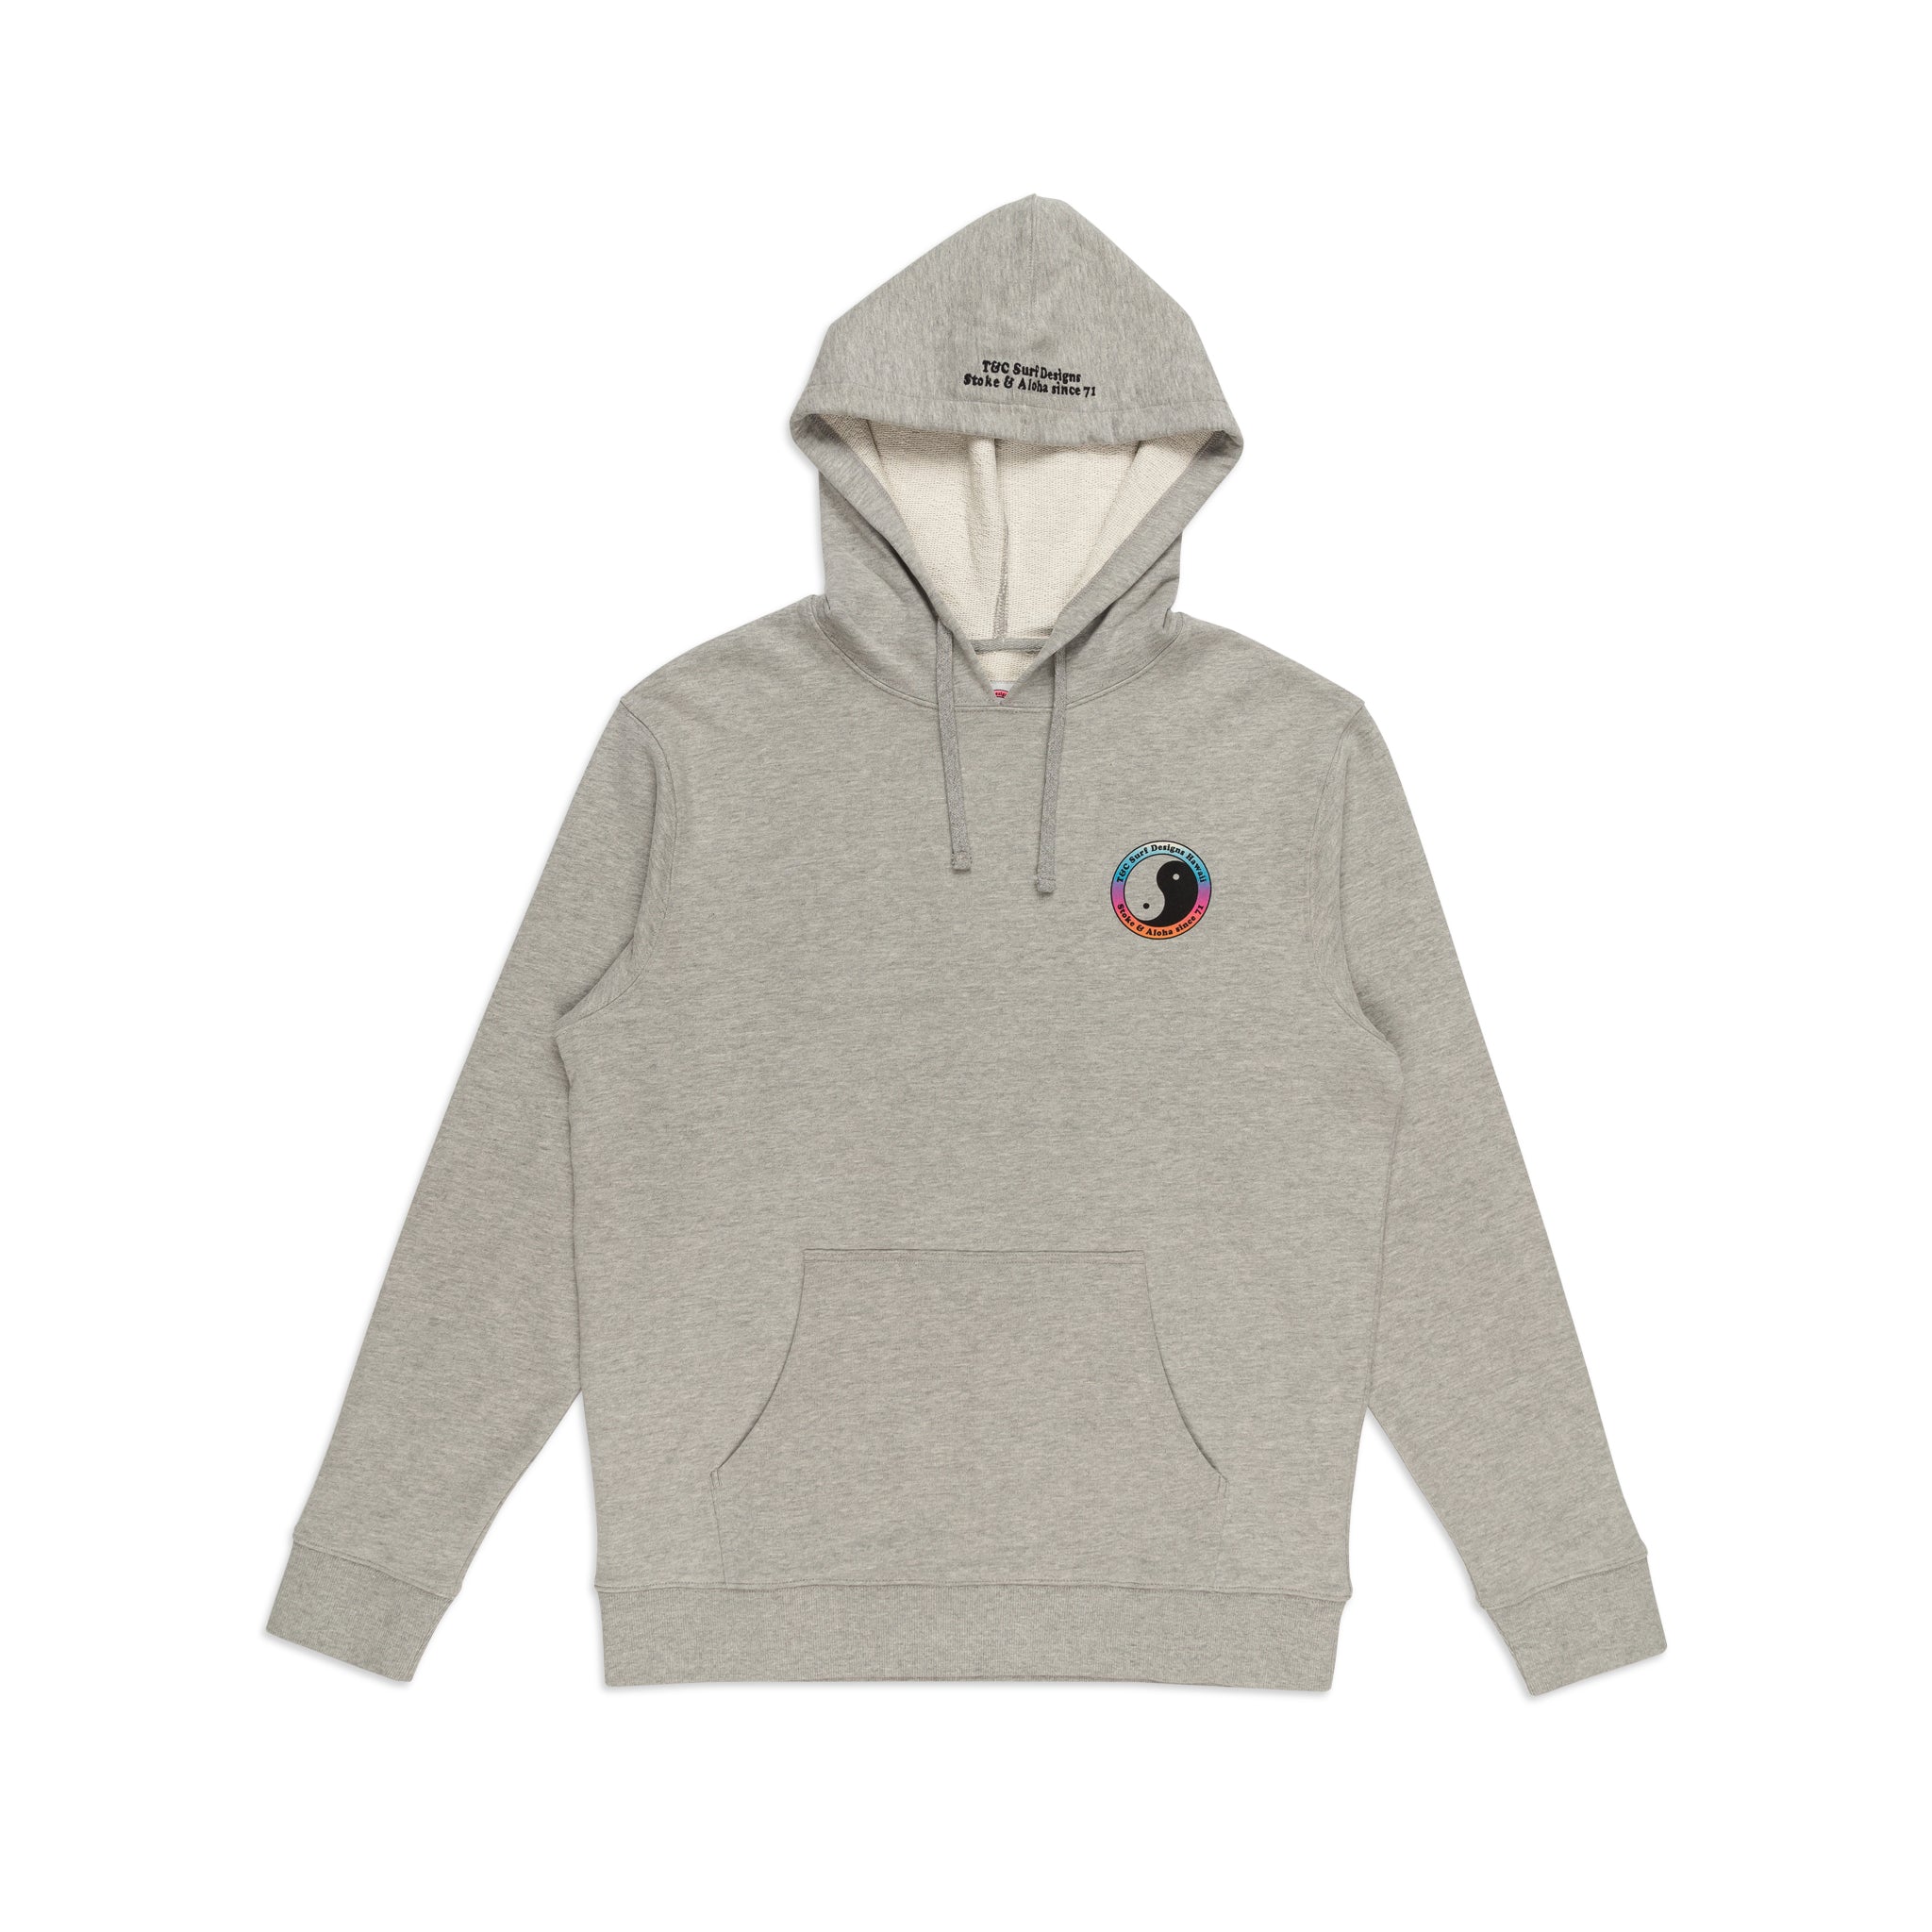 Town & Country Surf Designs 71 Hooded Fleece - Grey Heather